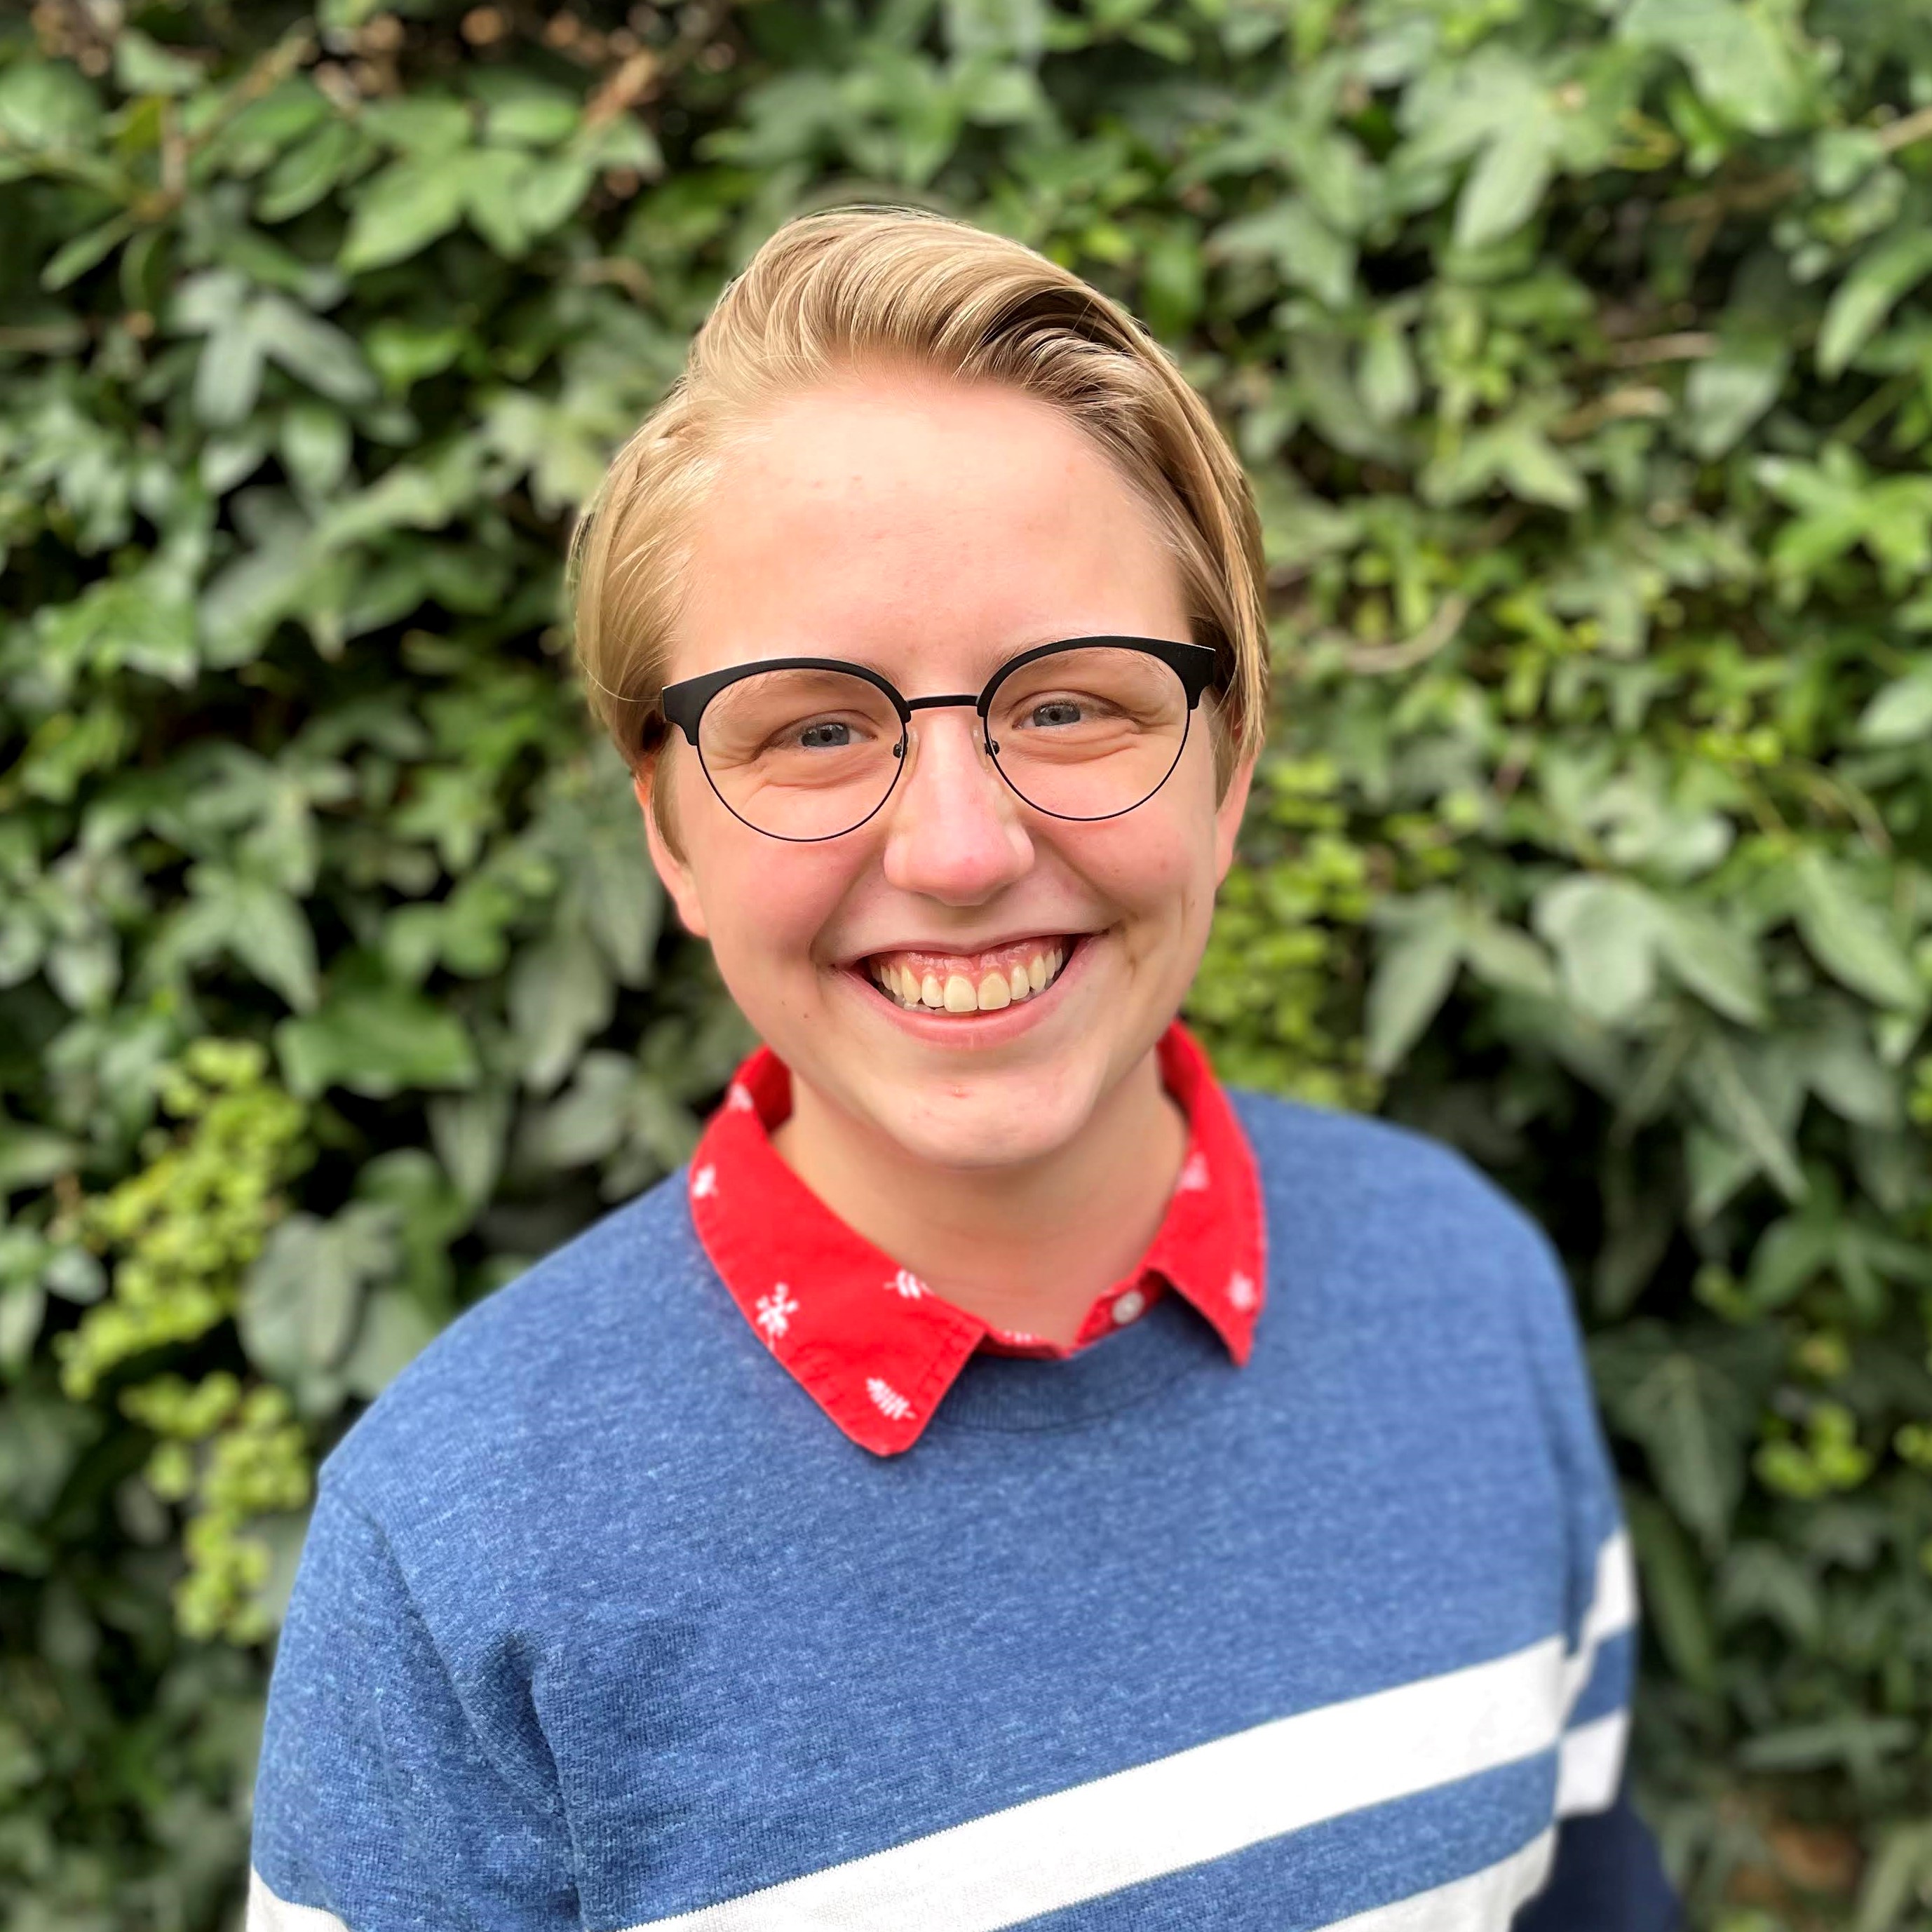 Claire, a white non-binary person with short blond hair wearing glasses, smiles at the camera in front of a wall covered in leaves.